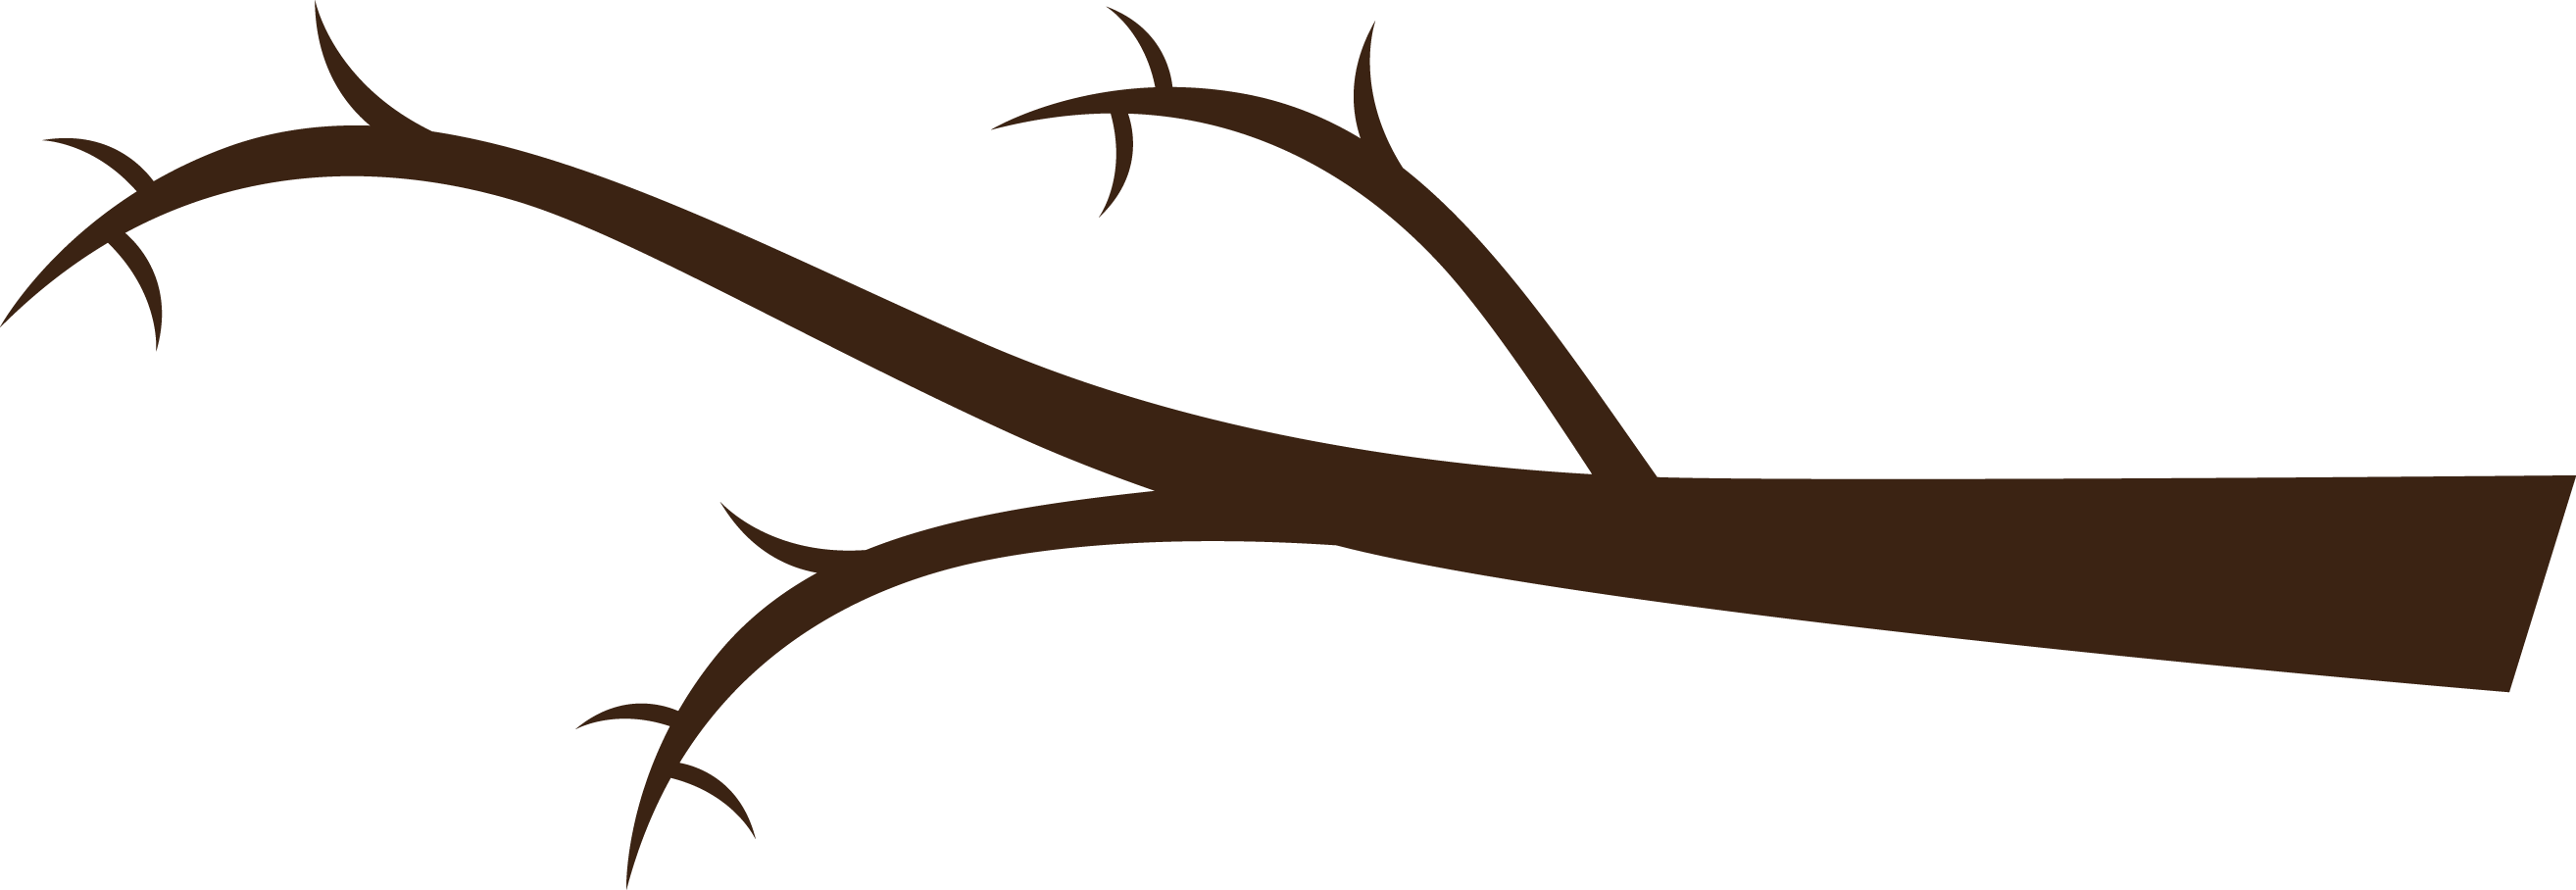 Silhouetted Tree Branchwith Thorns PNG